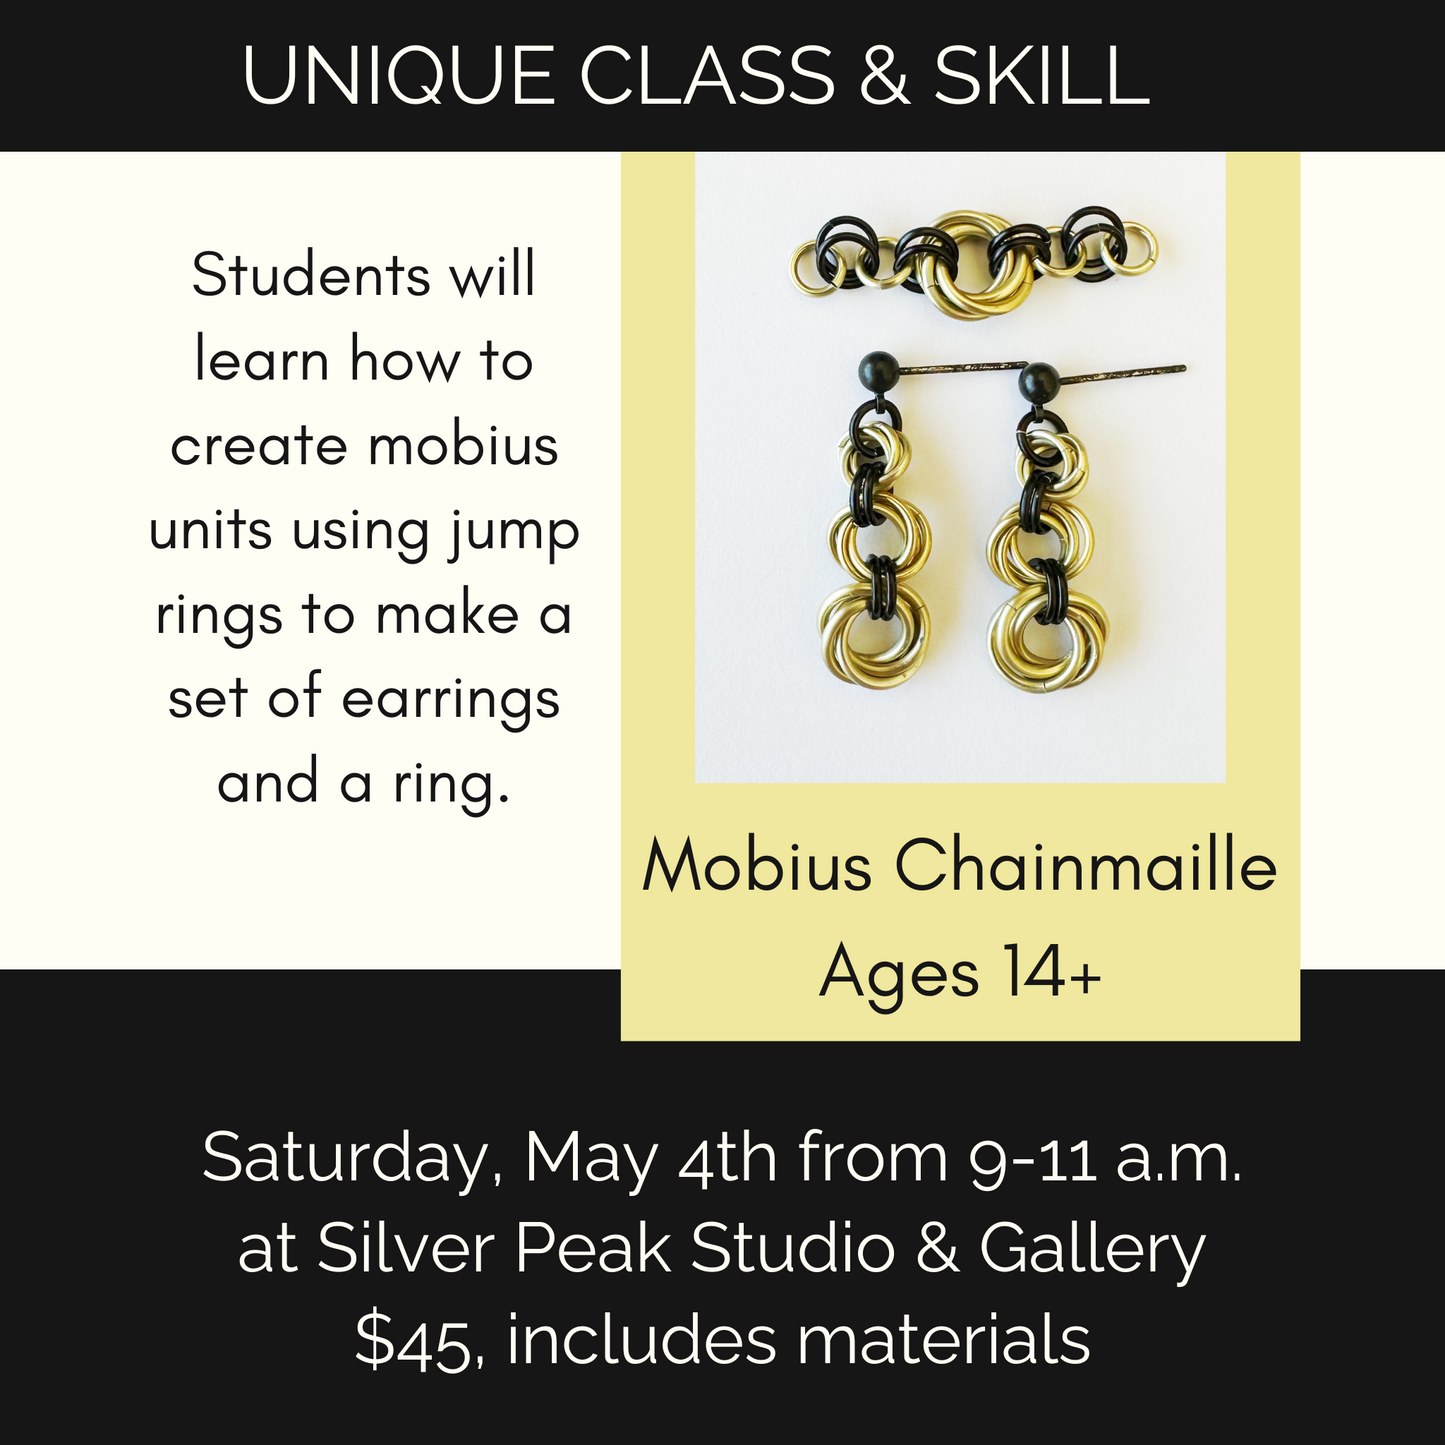 Mobius Chainmaille: Ages 14+: May 4th